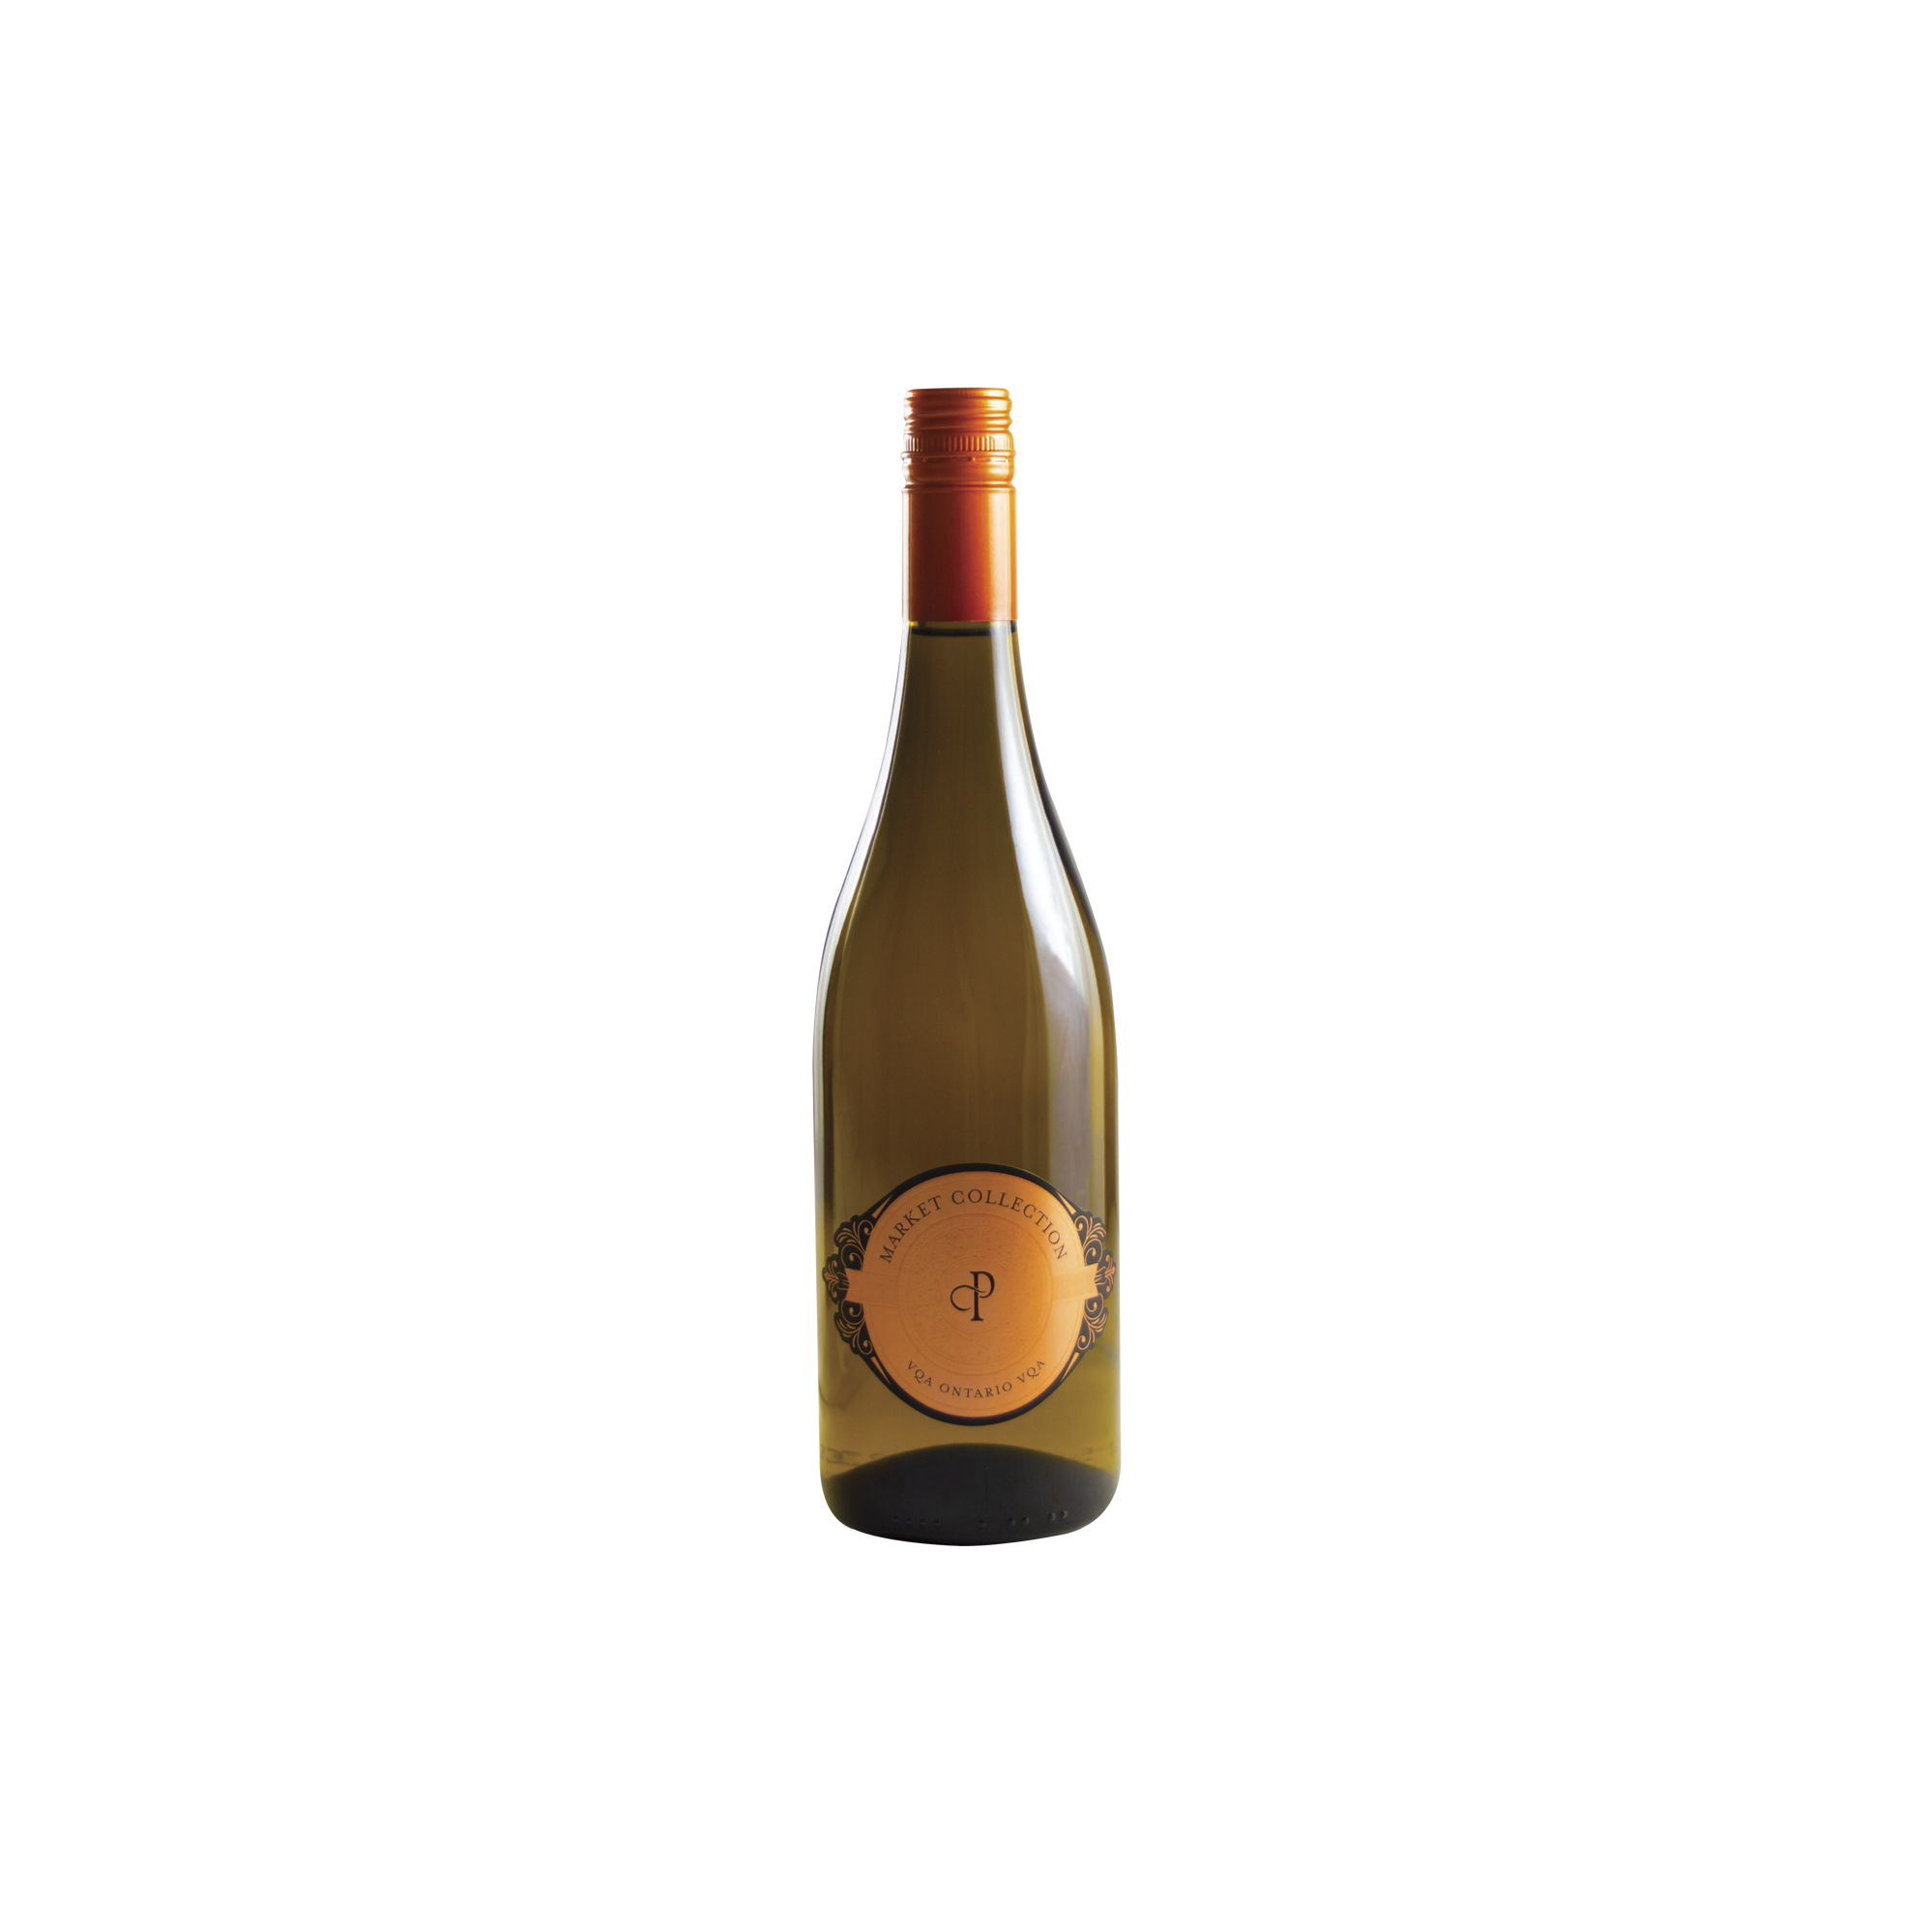 2020 Market Collection Pinot Gris